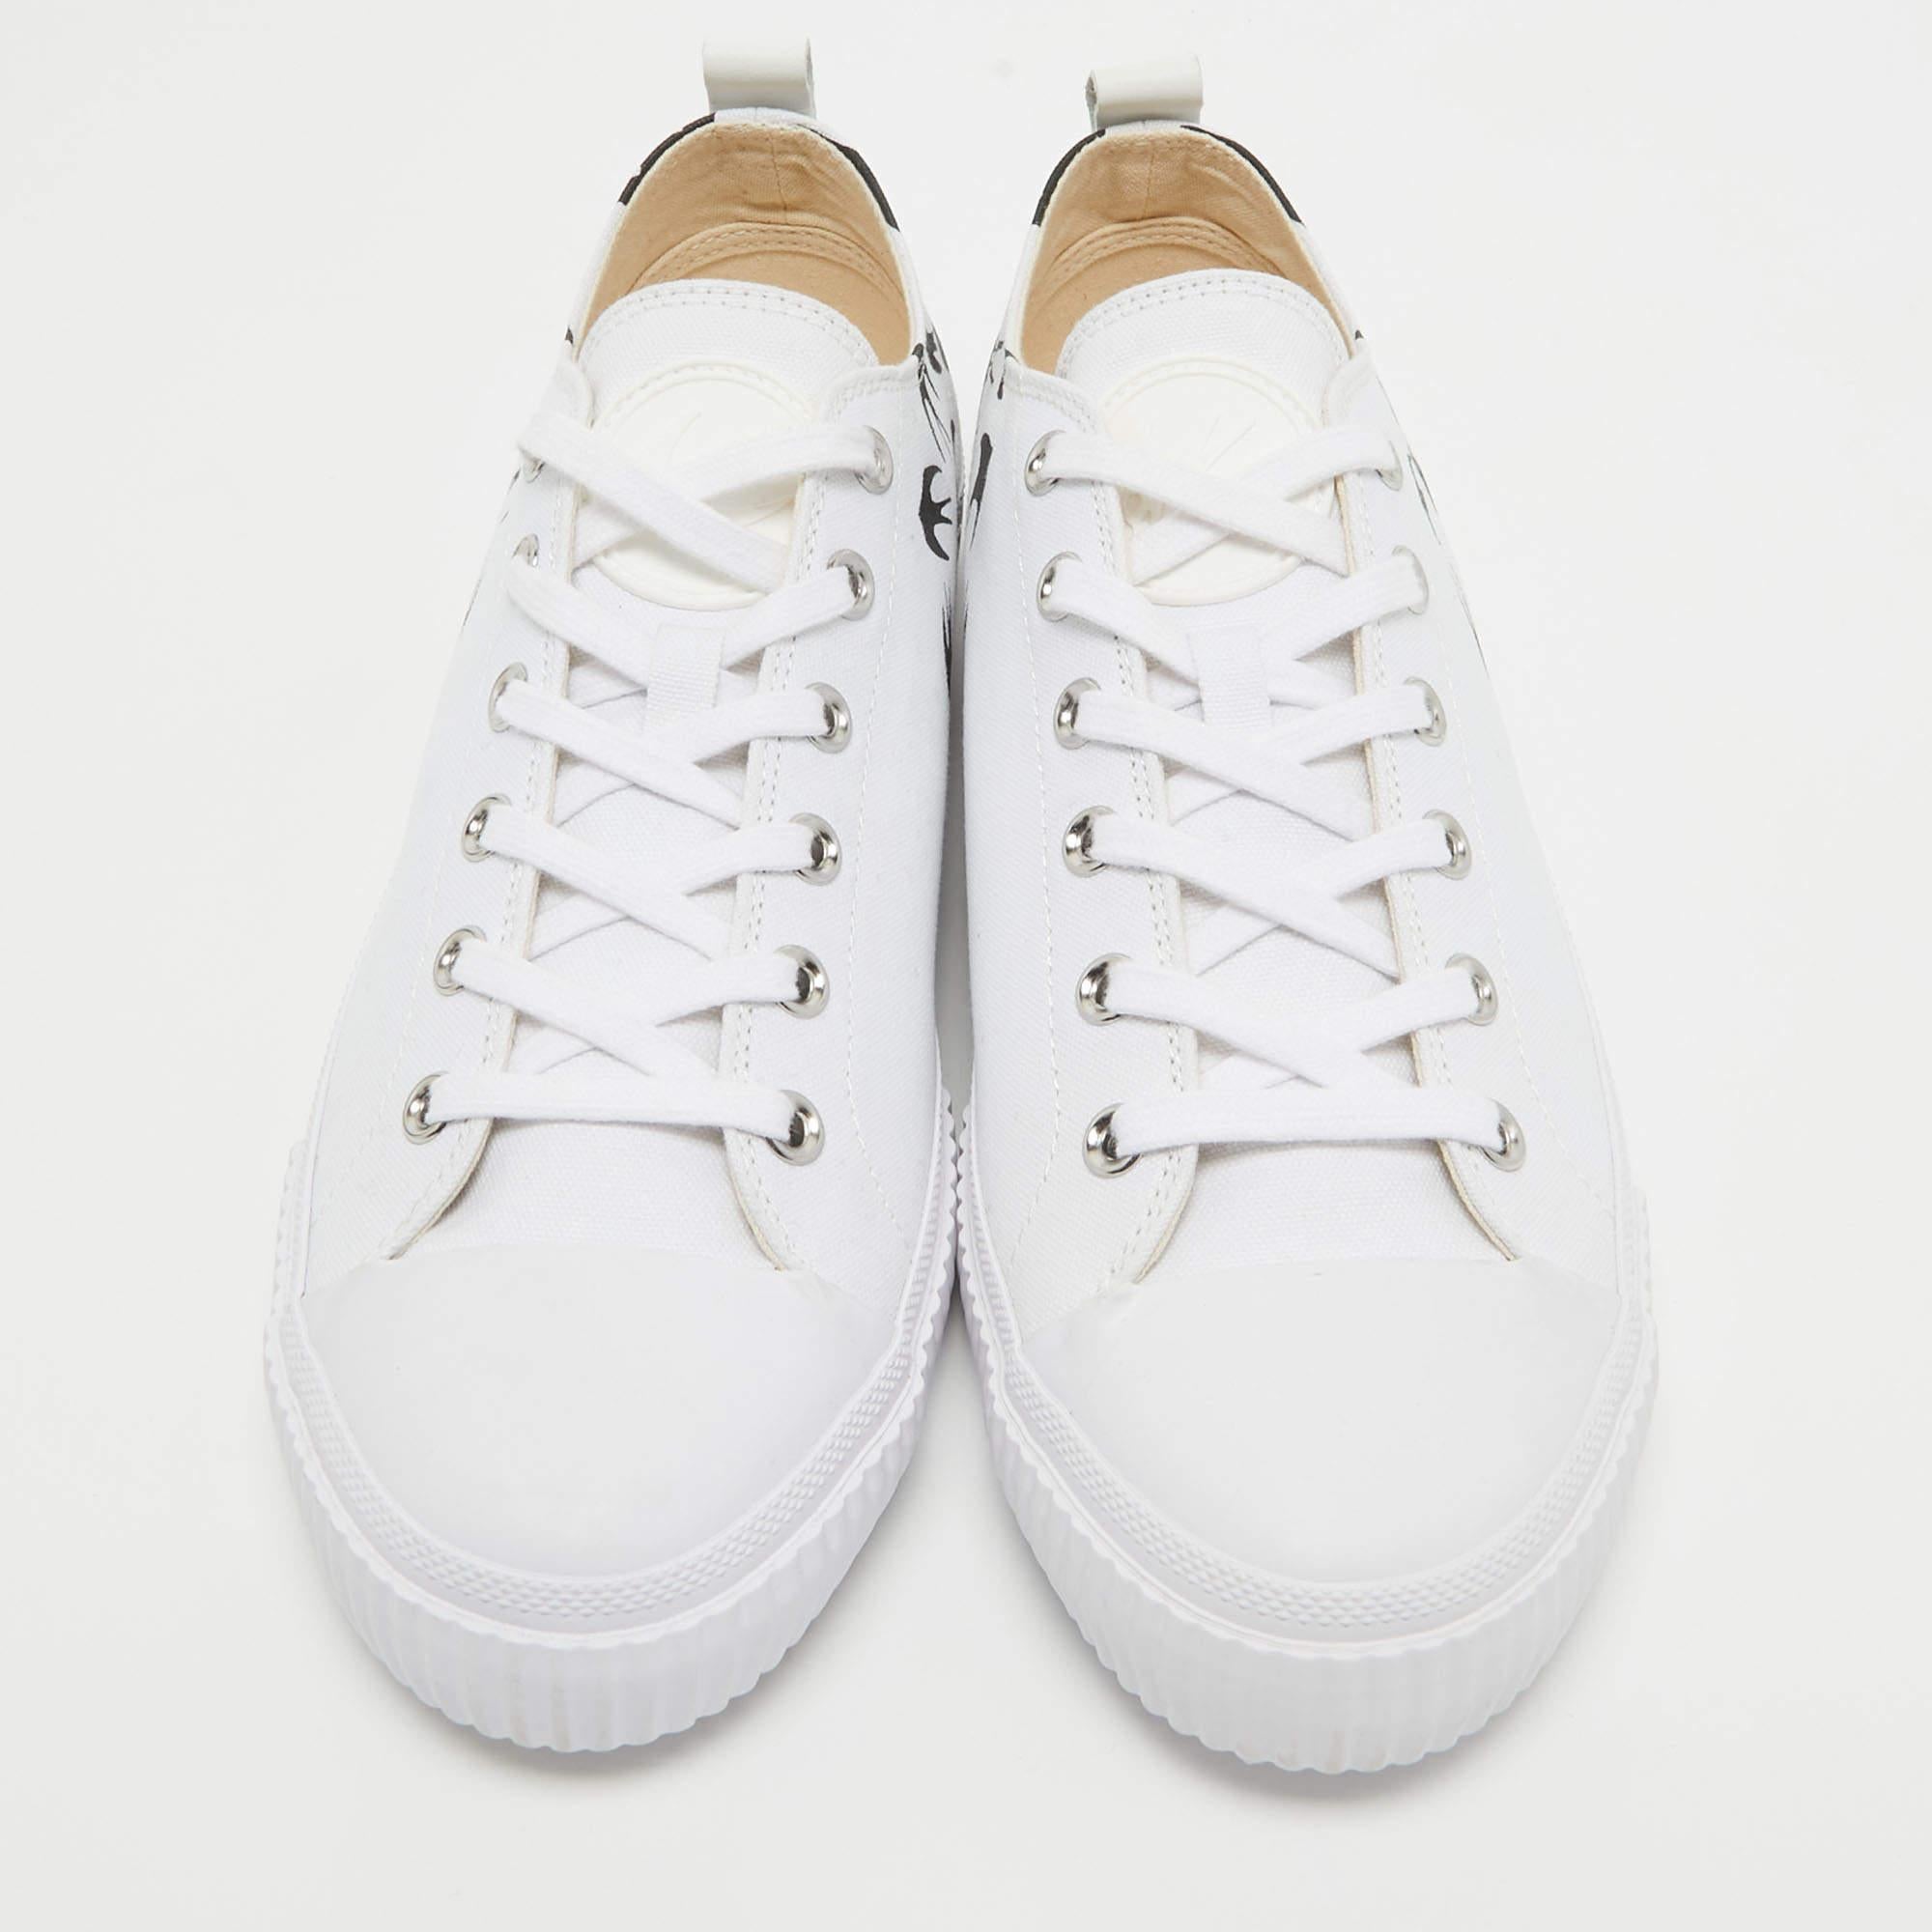 Women's McQ by Alexander McQueen White Canvas Swallow Sneakers Size 44